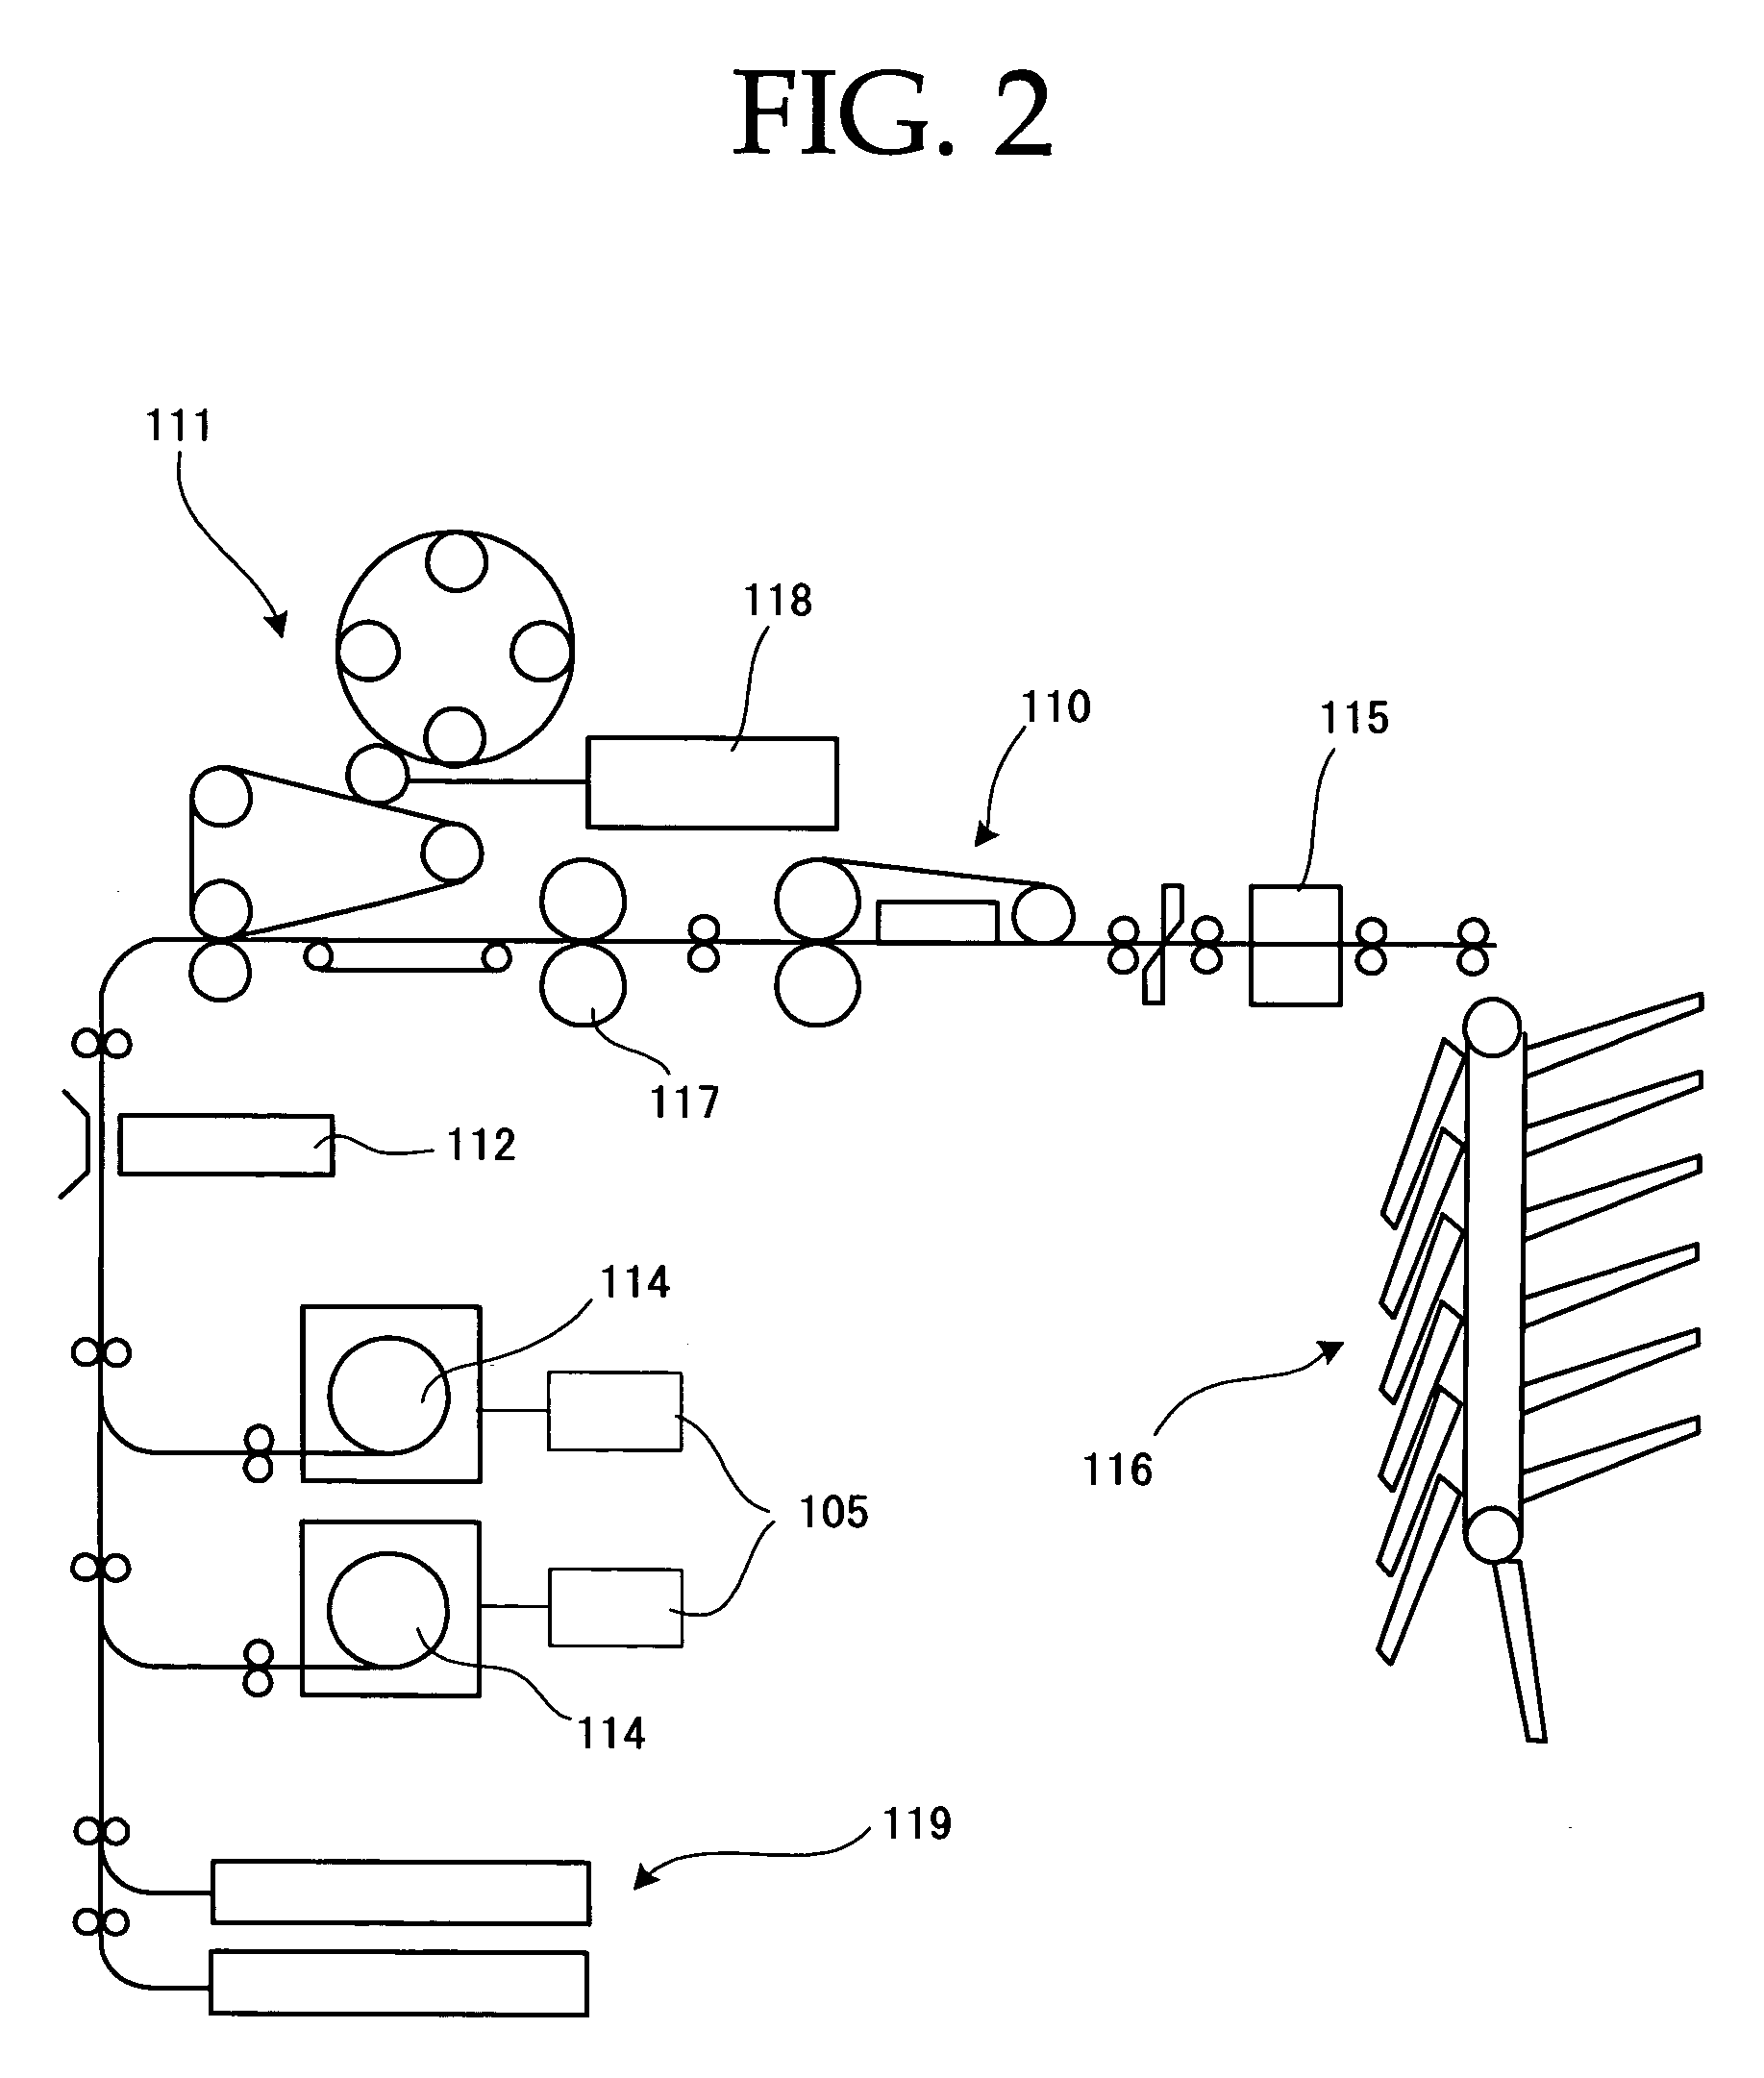 Image forming apparatus, image forming system, and electrophotographic print